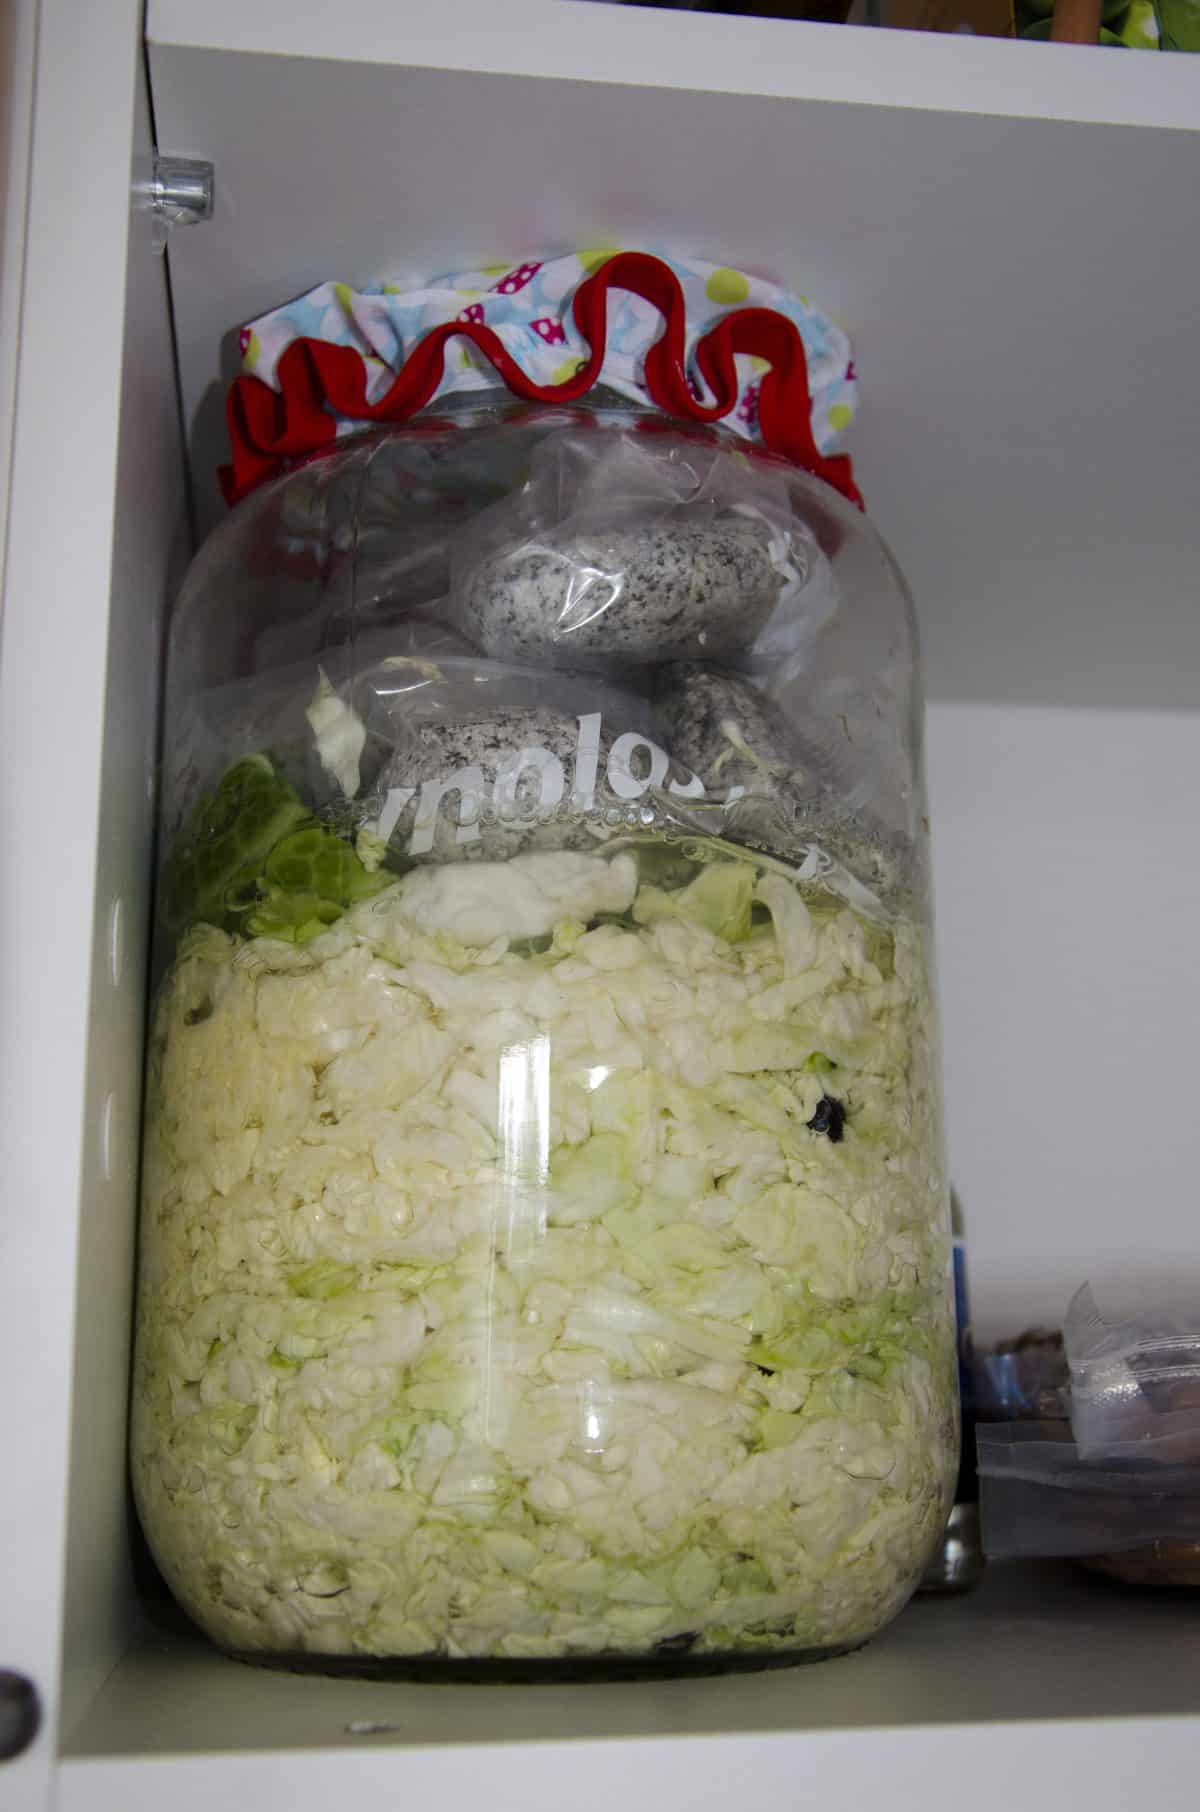 The next day, the liquid has raised up over the amount of cabbage. It's ready to sit and ferment.